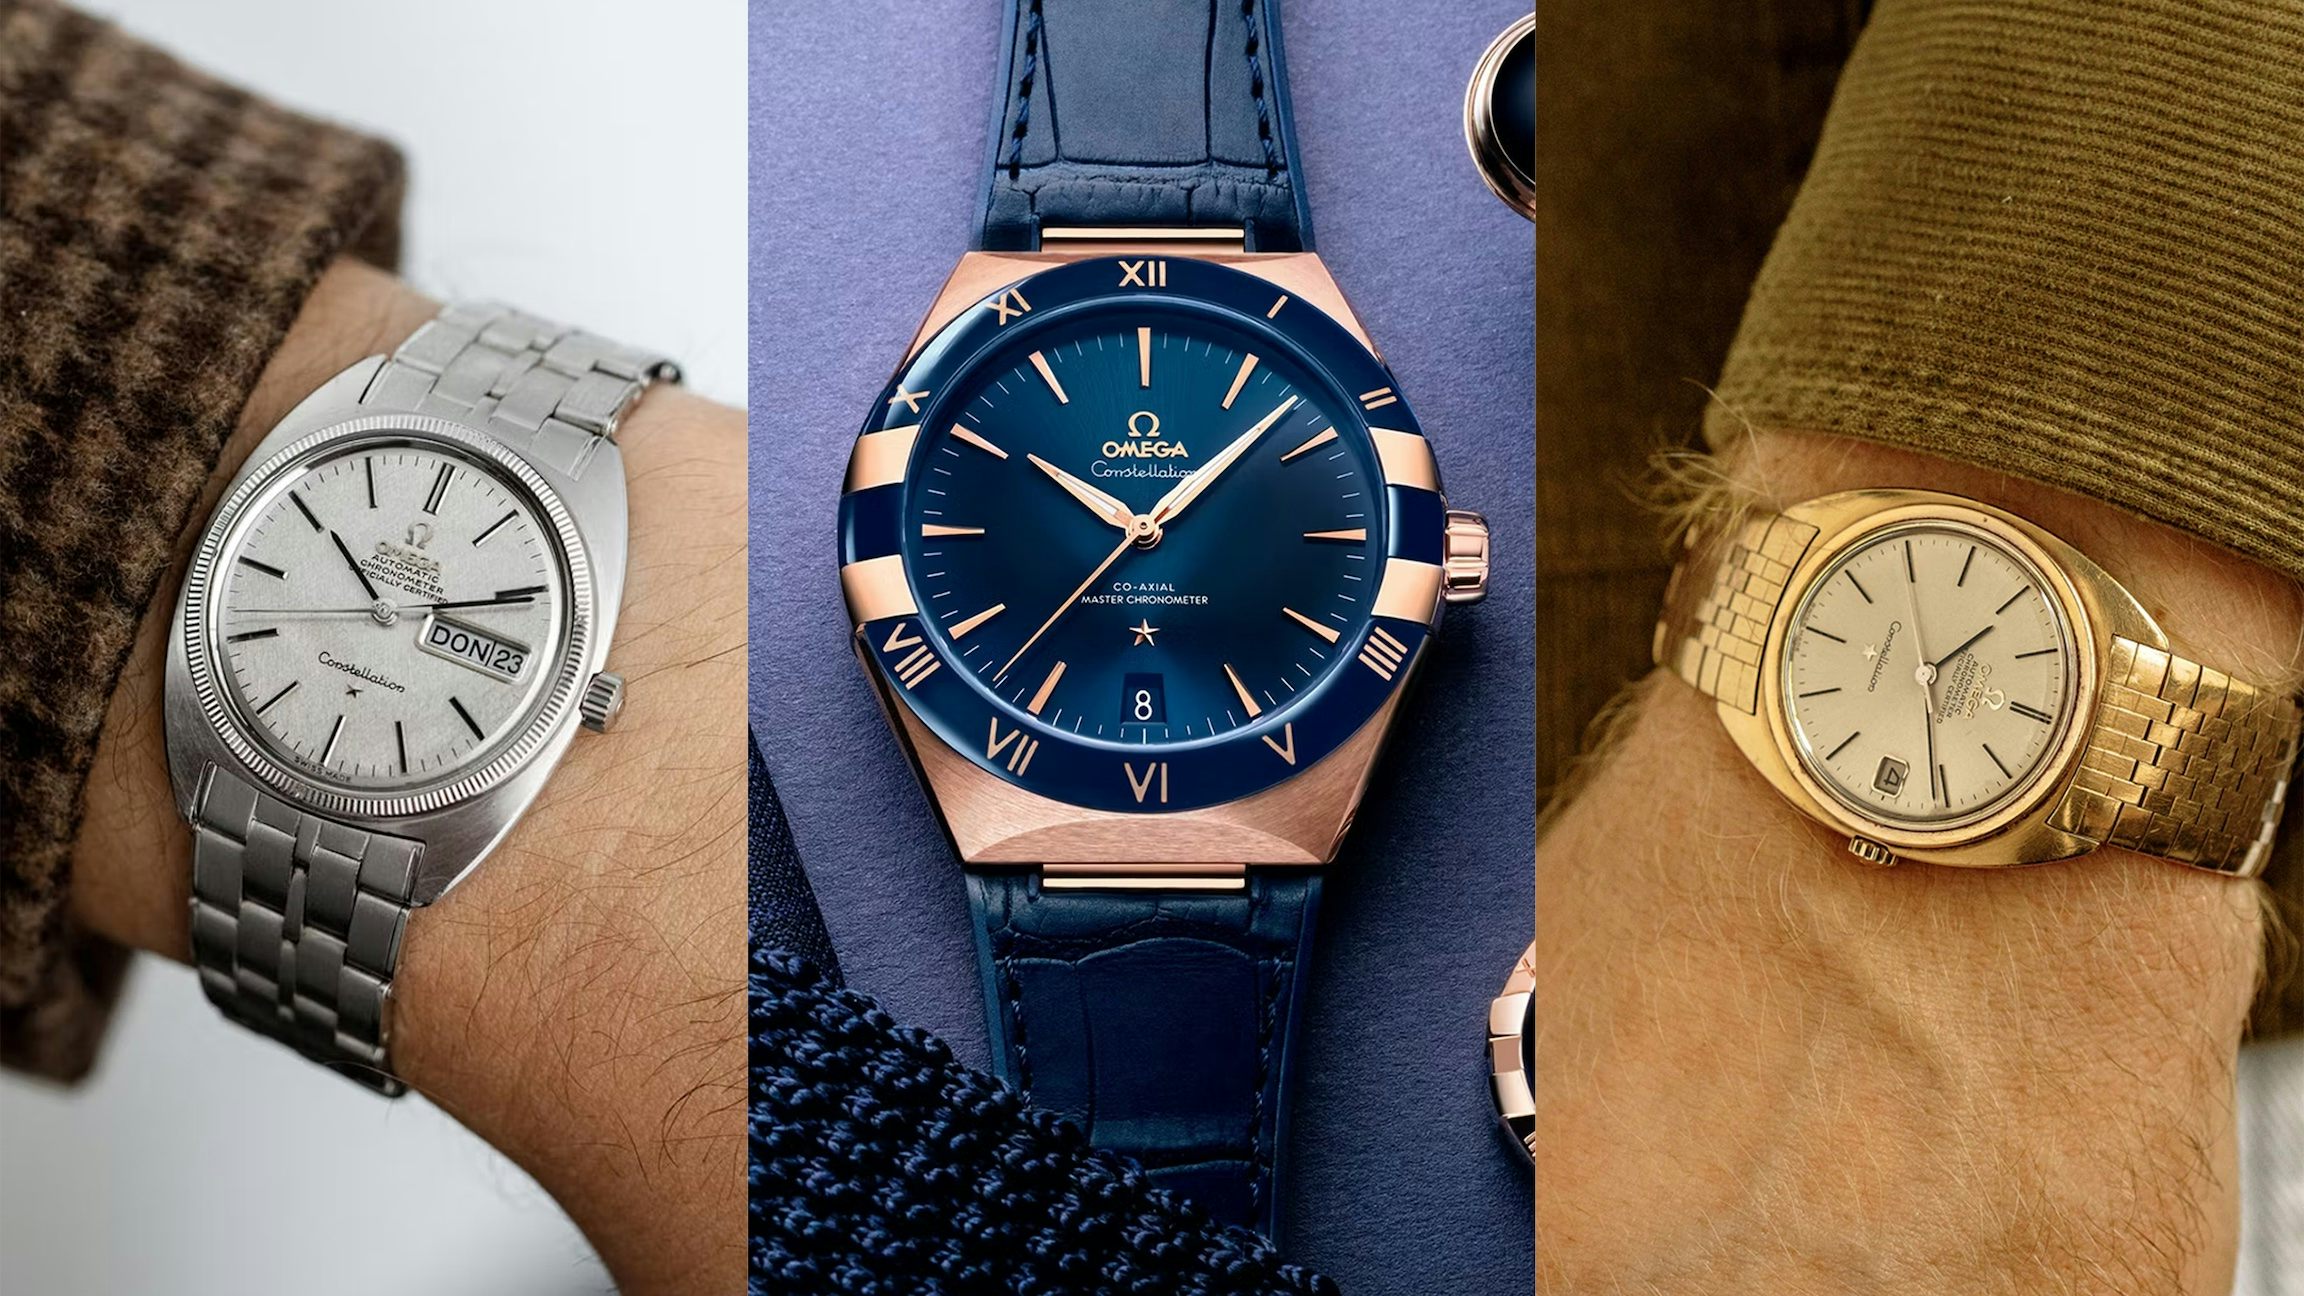 A History Of The Omega Constellation, From 1952 To Today